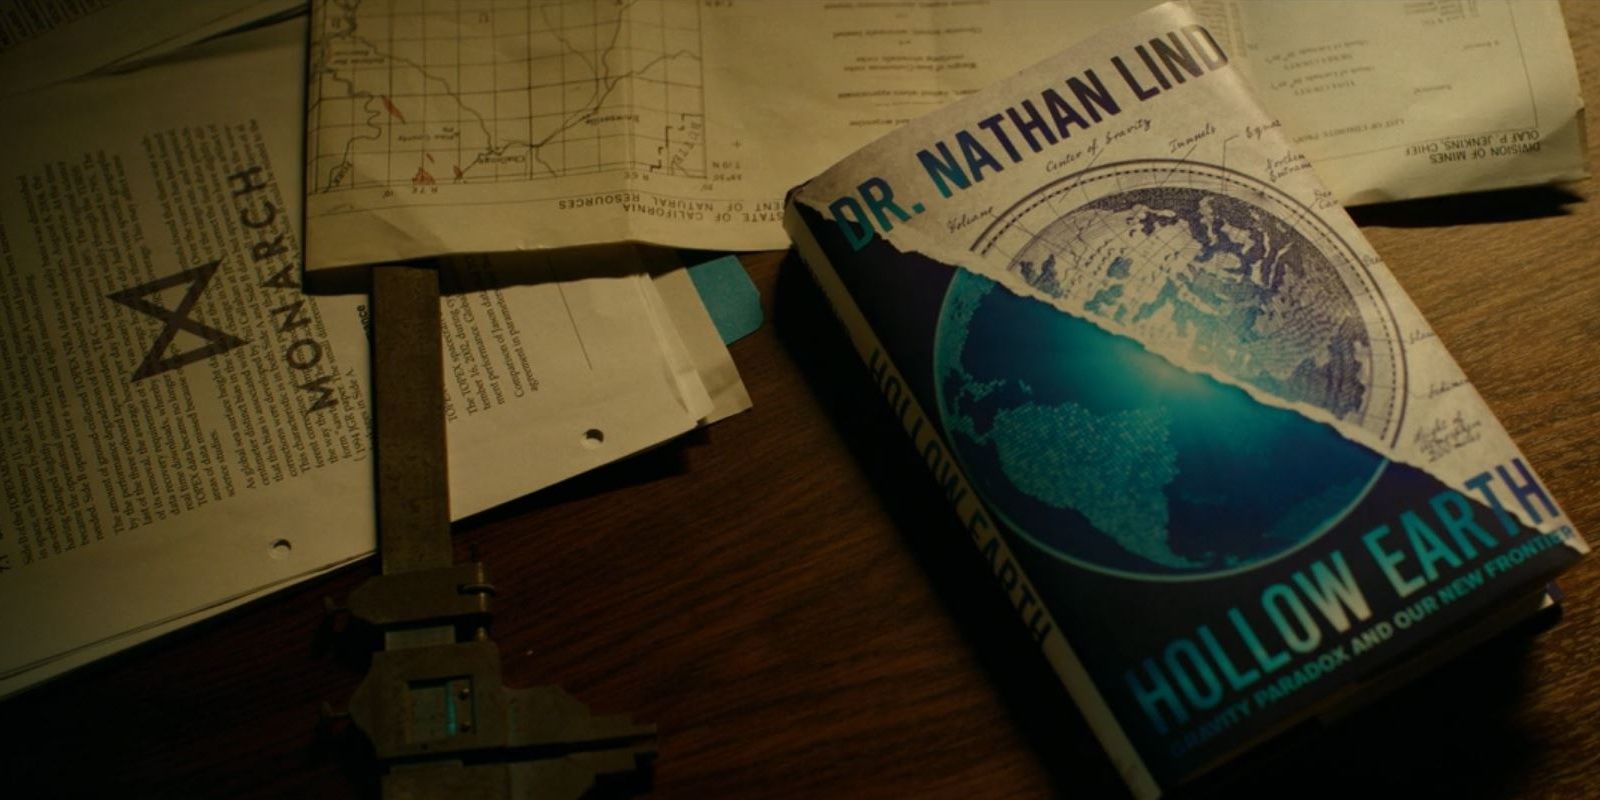 A desk bearing Nathan Lind's book "Hollow Earth"